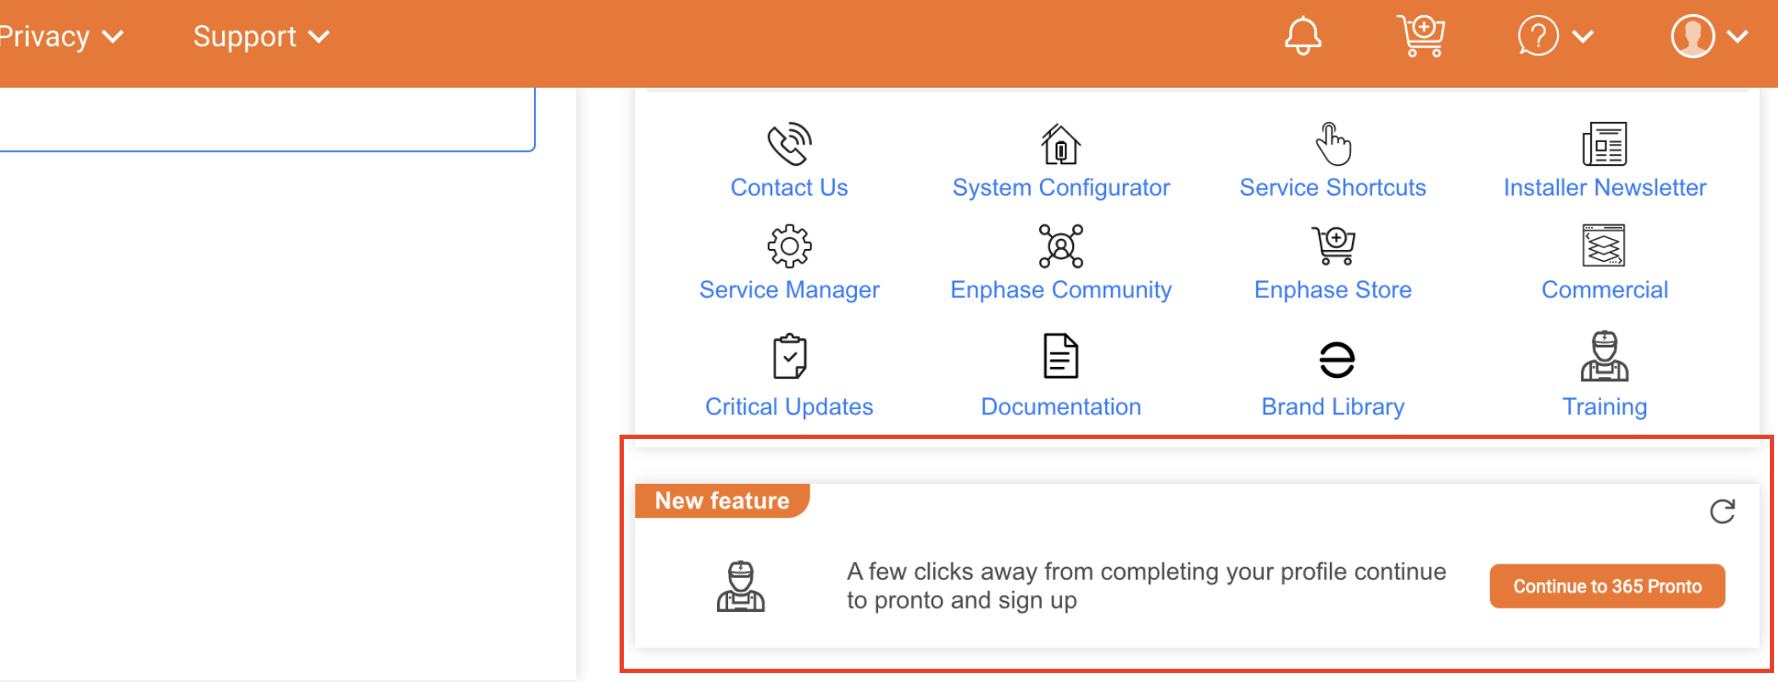 Screenshot of new features in Enphase Installer Portal